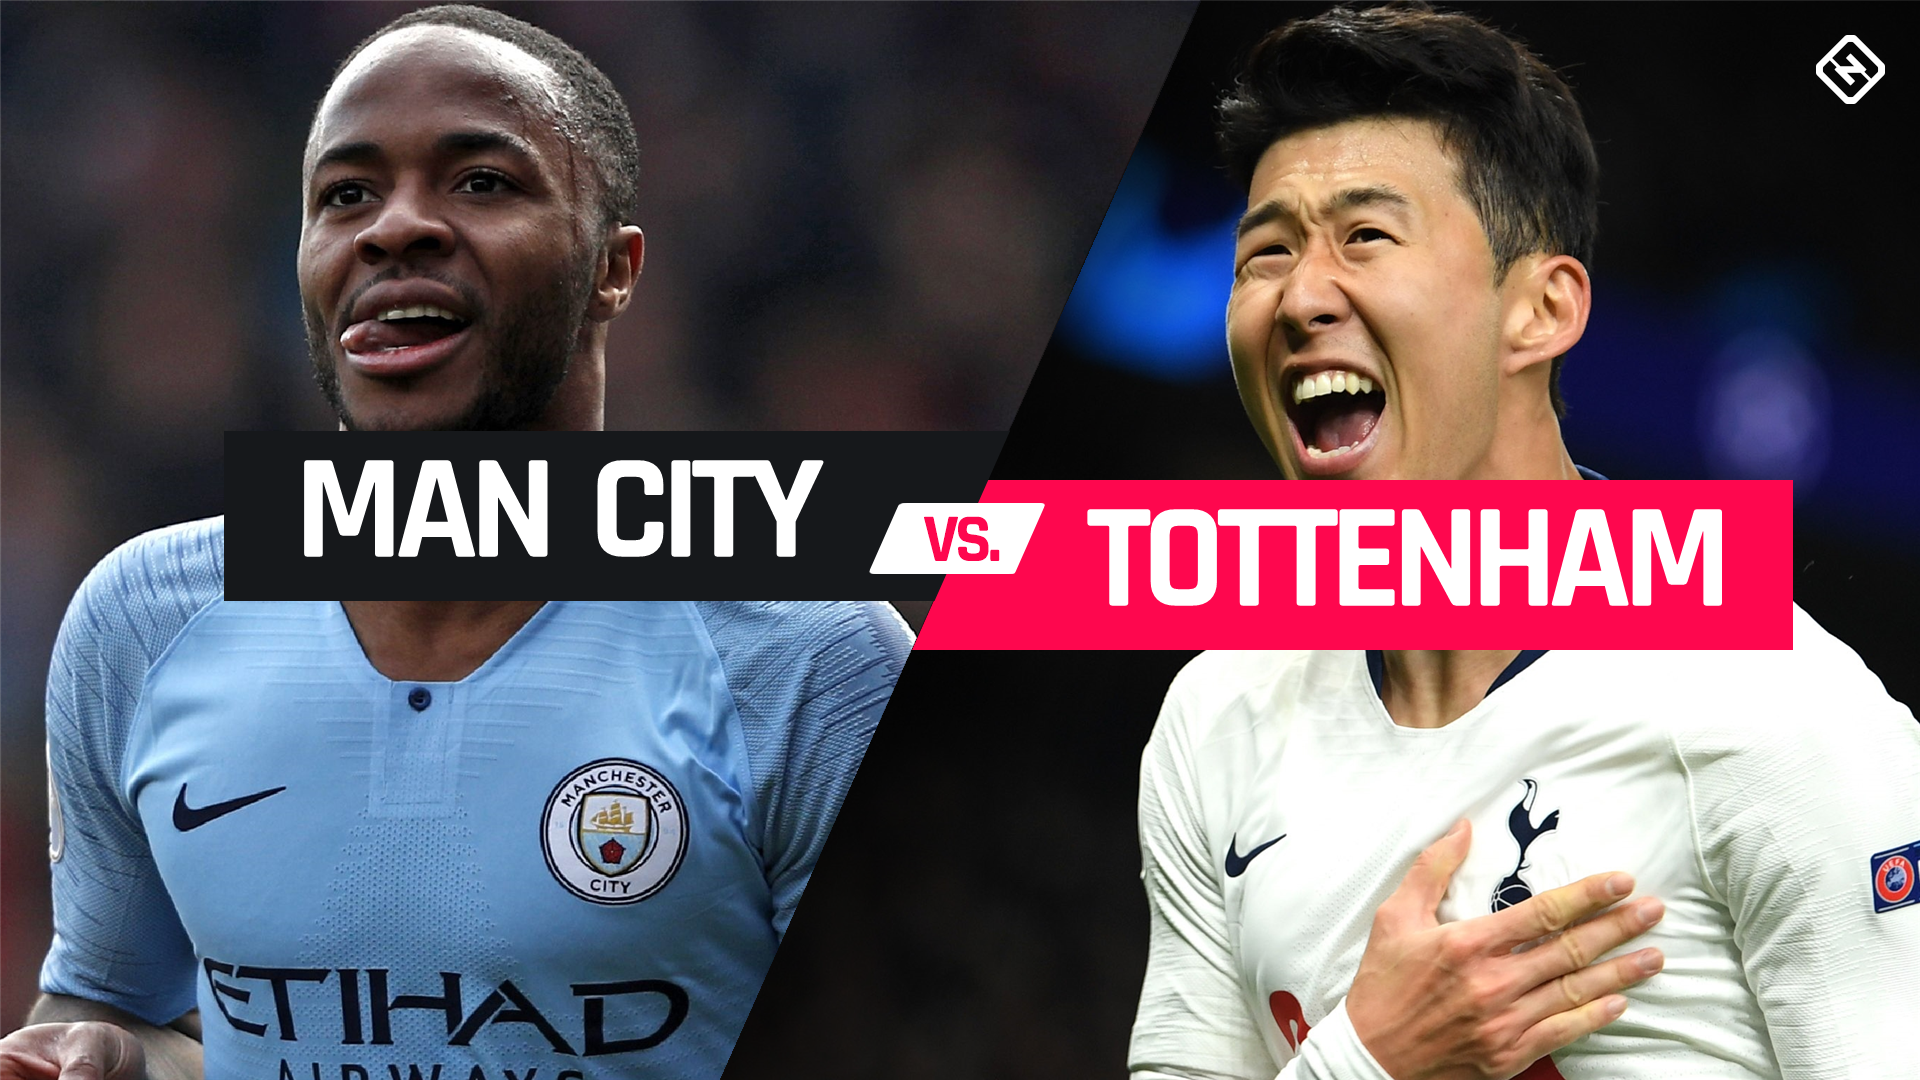 Champions League: How to watch Manchester City vs. Tottenham live in